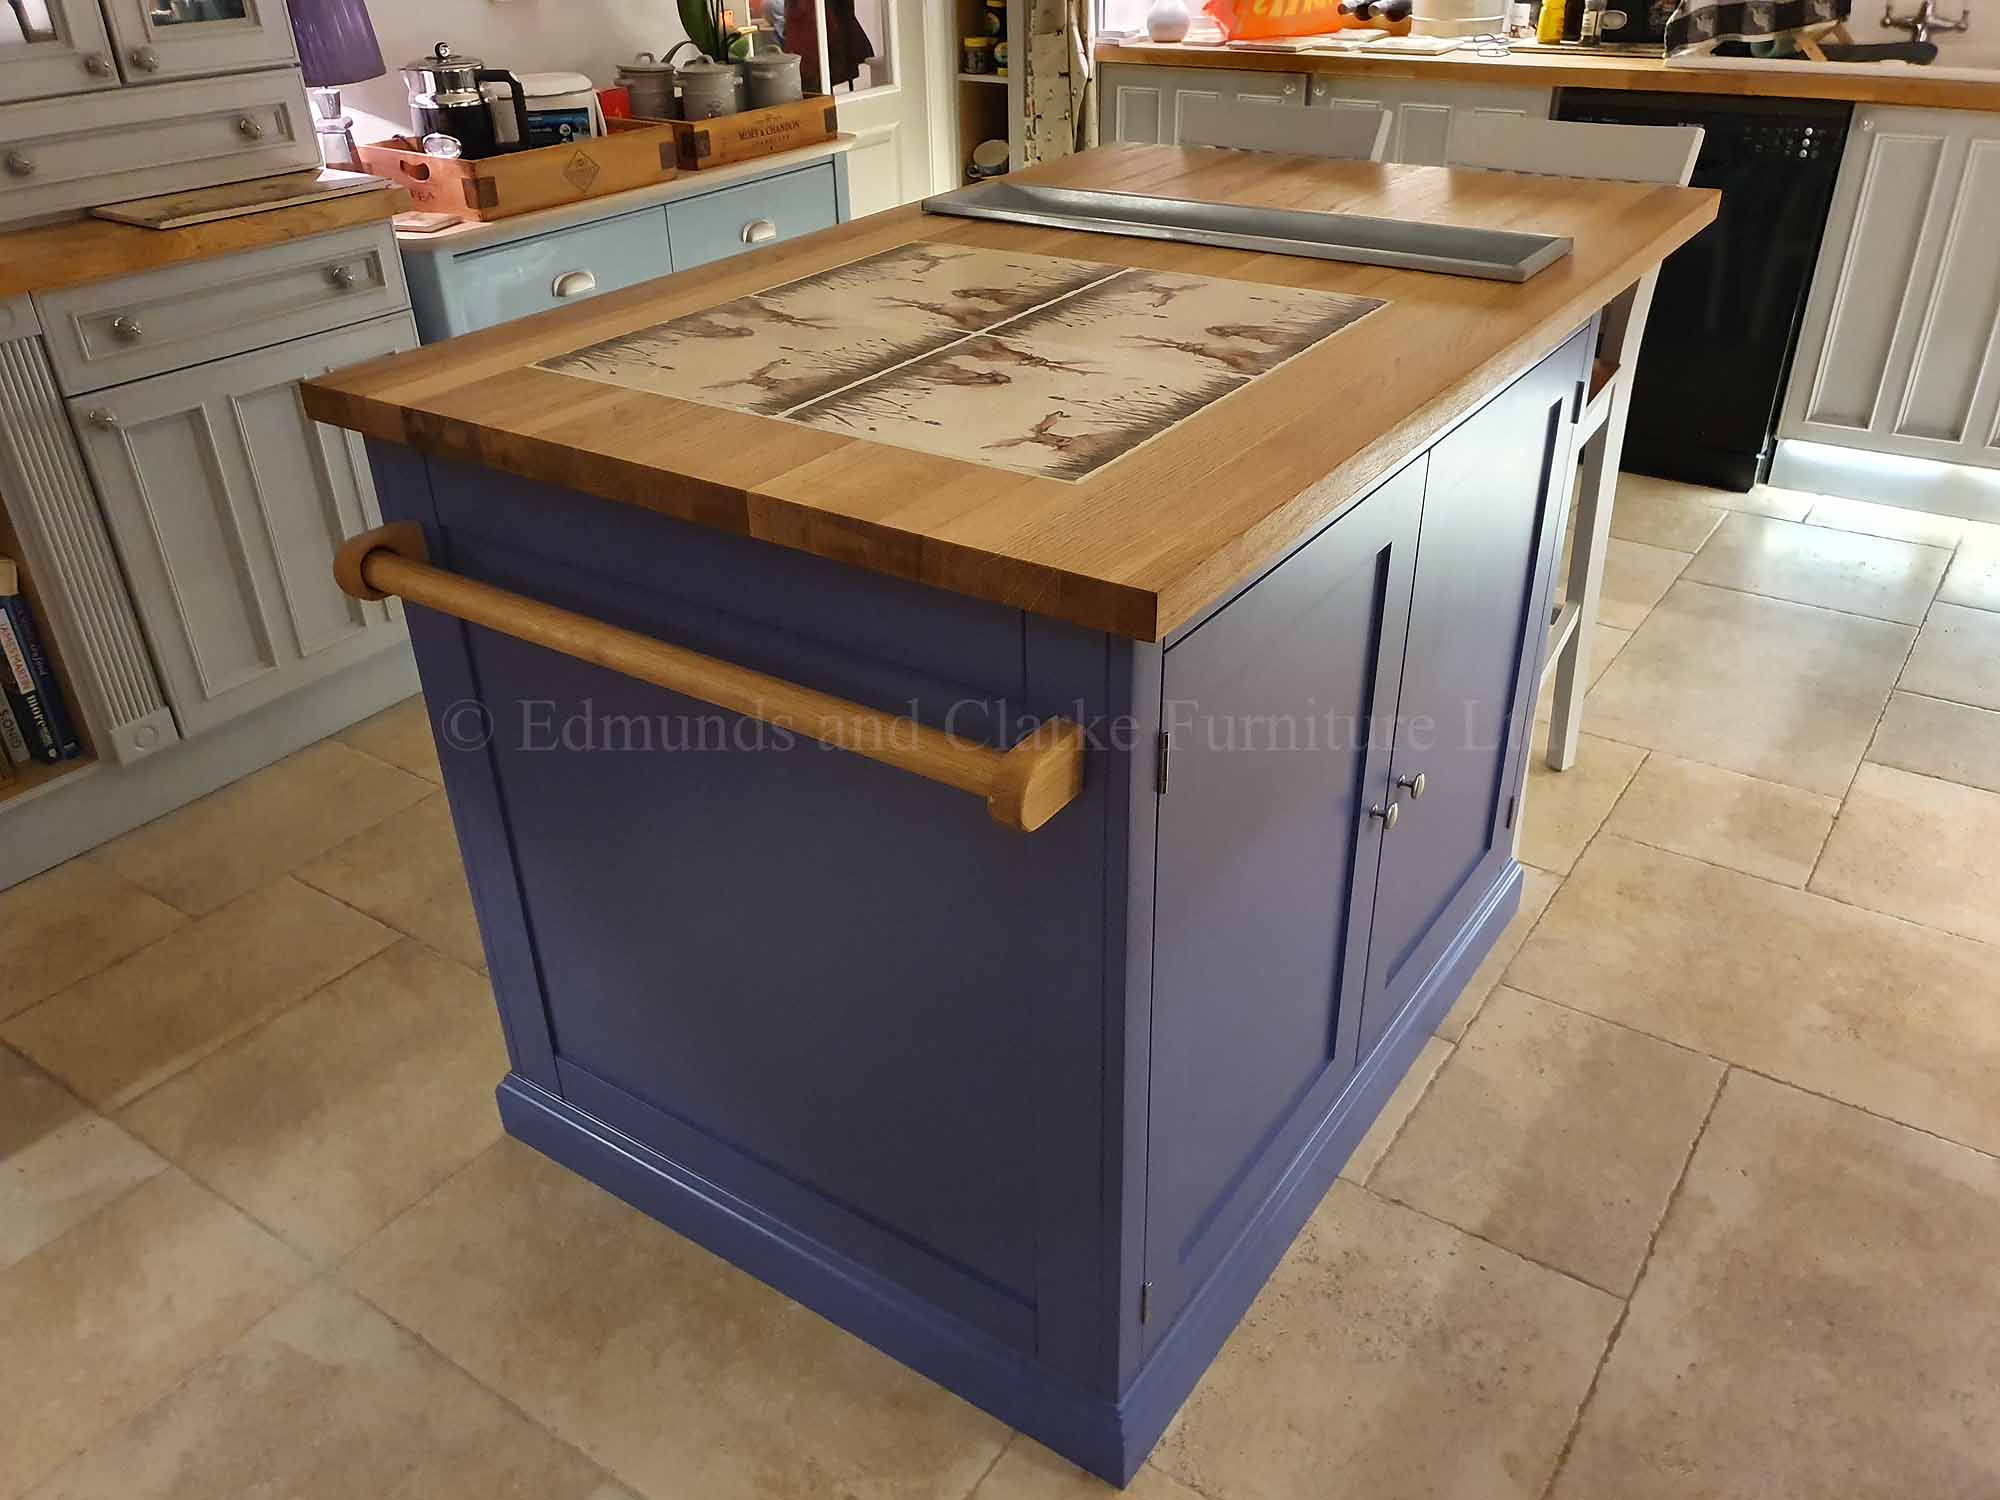 Kitchen Island with storage and seating